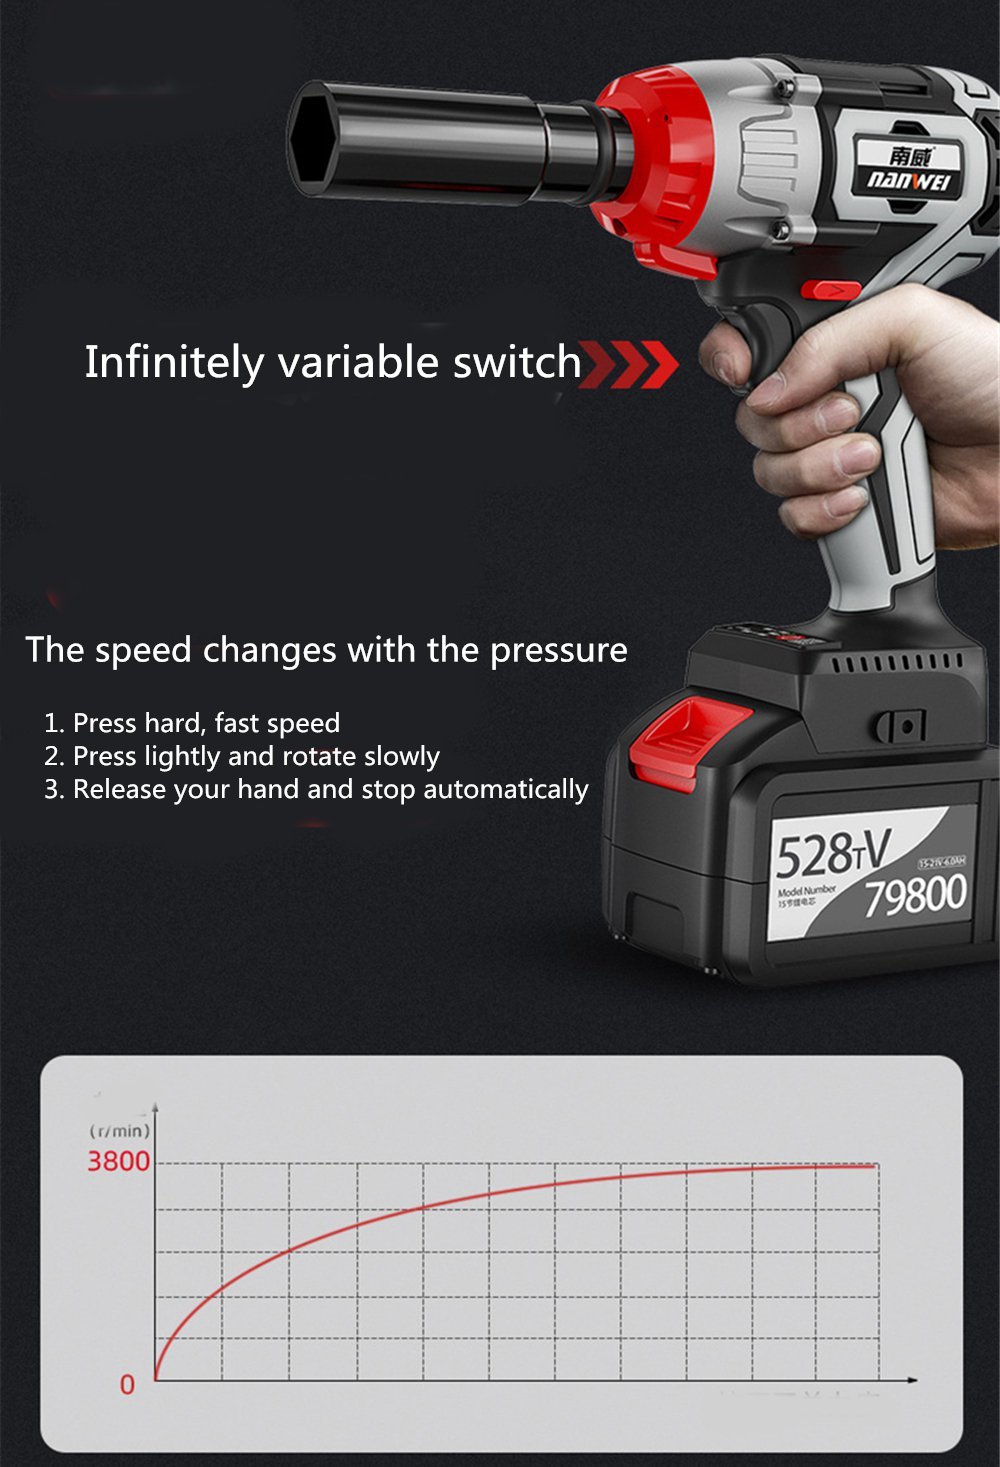 NANWEI-380NM-Brushless-Electric-Impact-Wrench-Adjustable-Speed-Regulation-With-60Ah-Lithium-Battery--1750113-5